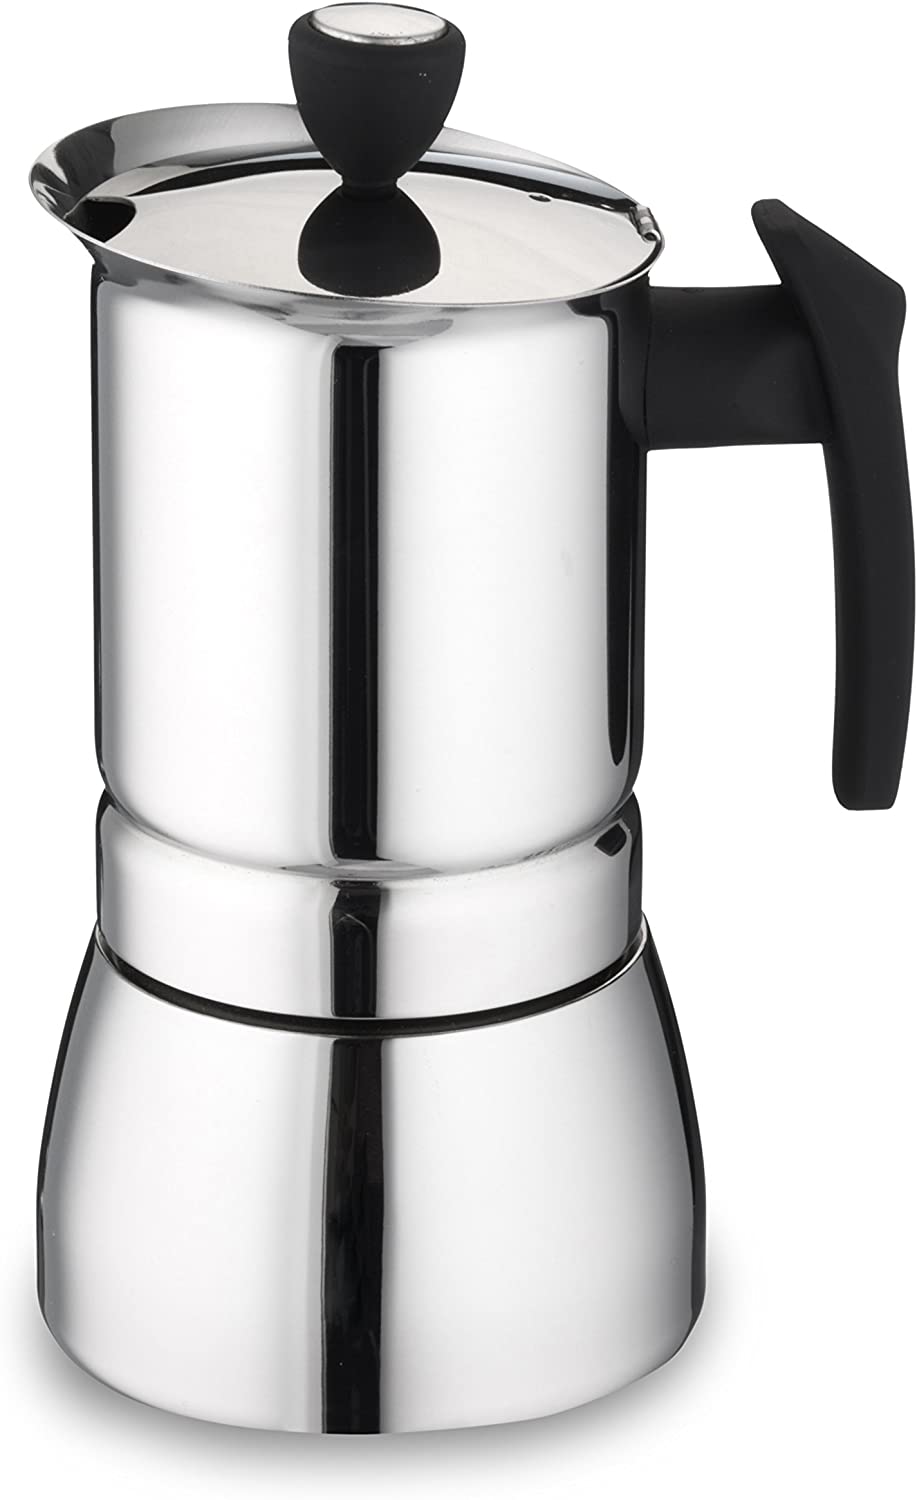 Cafe Ole by Grunwerg Italian Style Stainless Steel Espresso Coffee Maker, Stainless Steel, Silver, 4 Cup